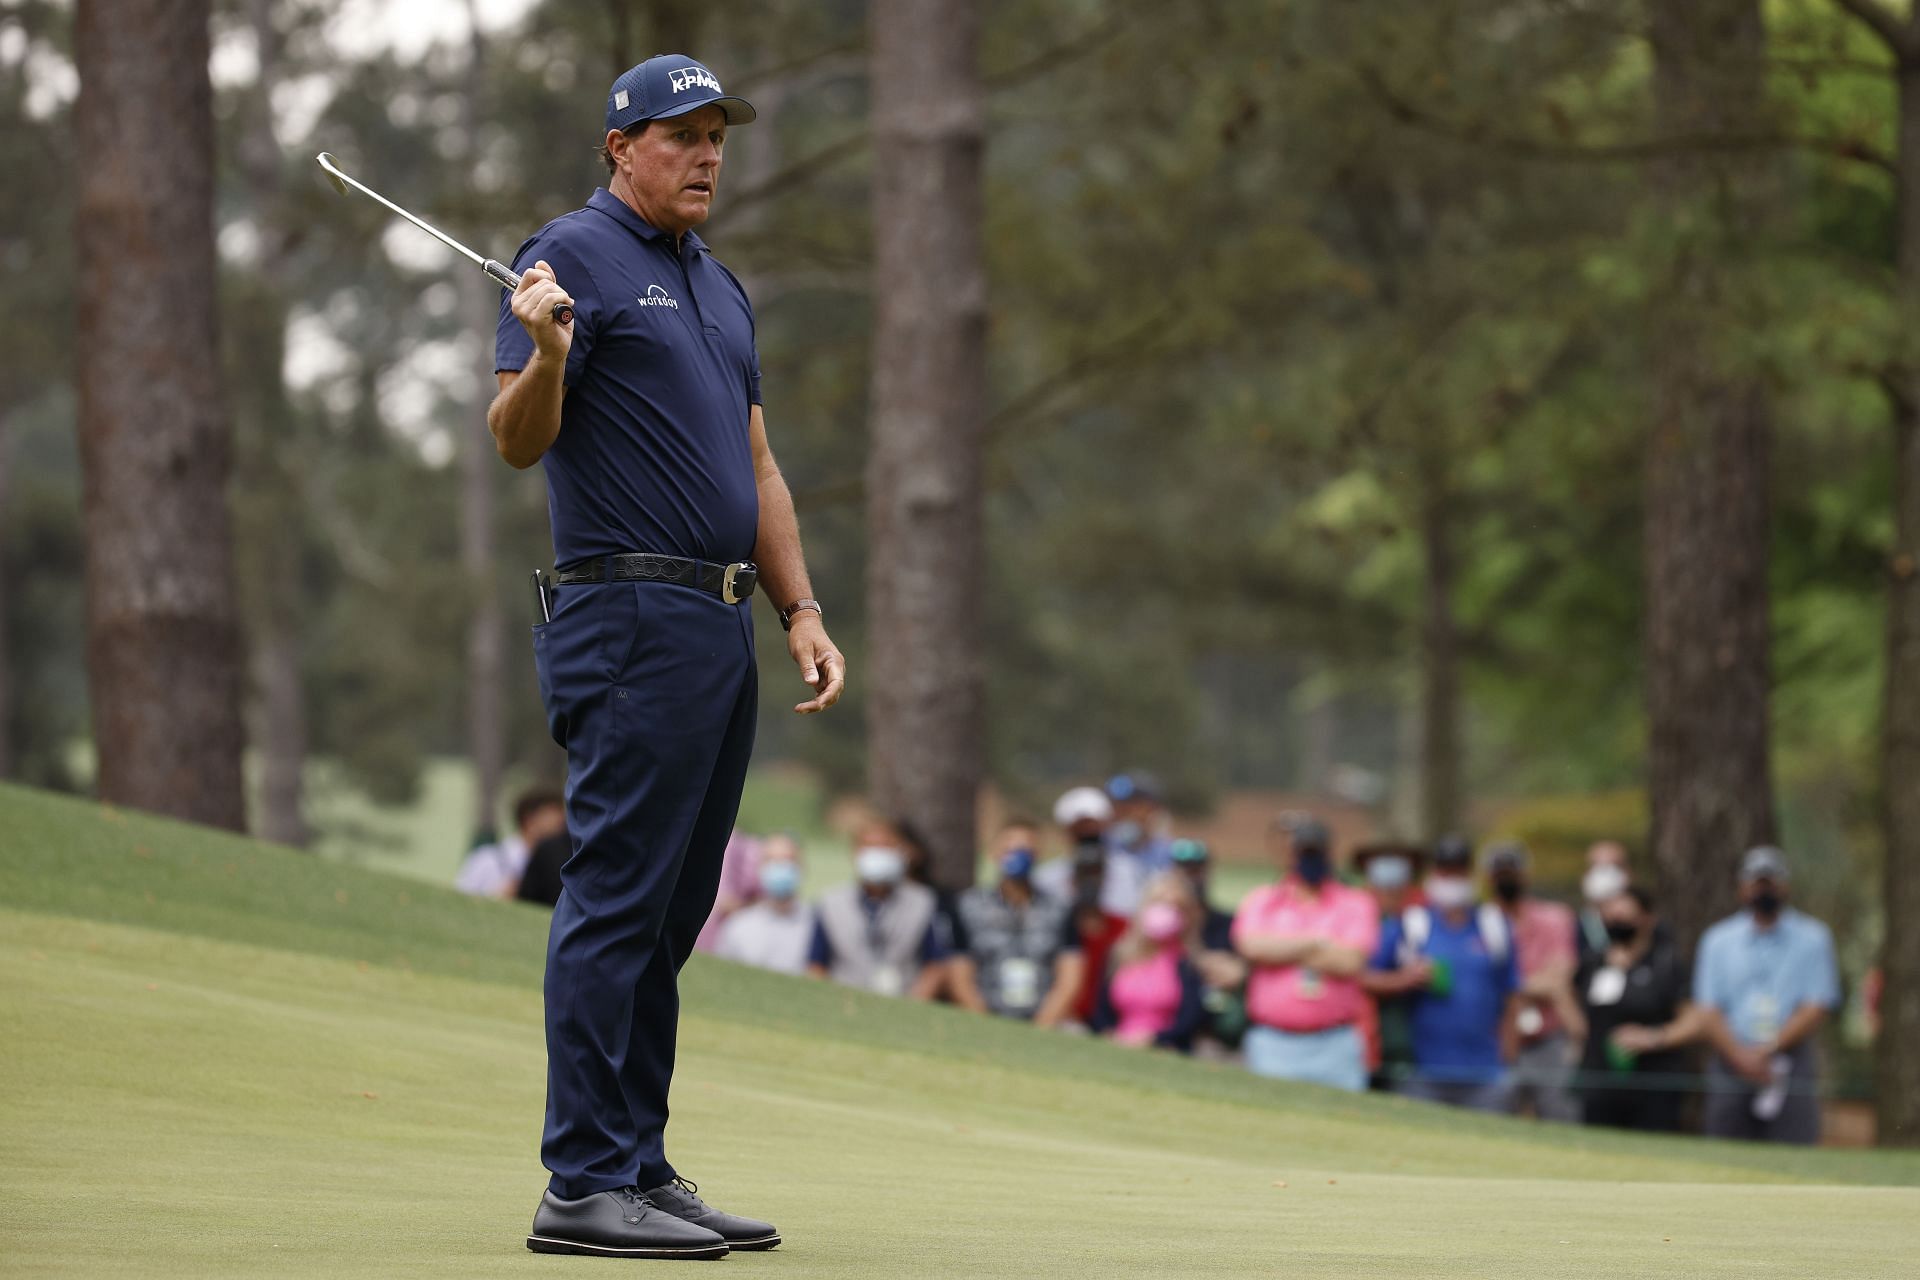 When was Phil Mickelson's last Masters win?